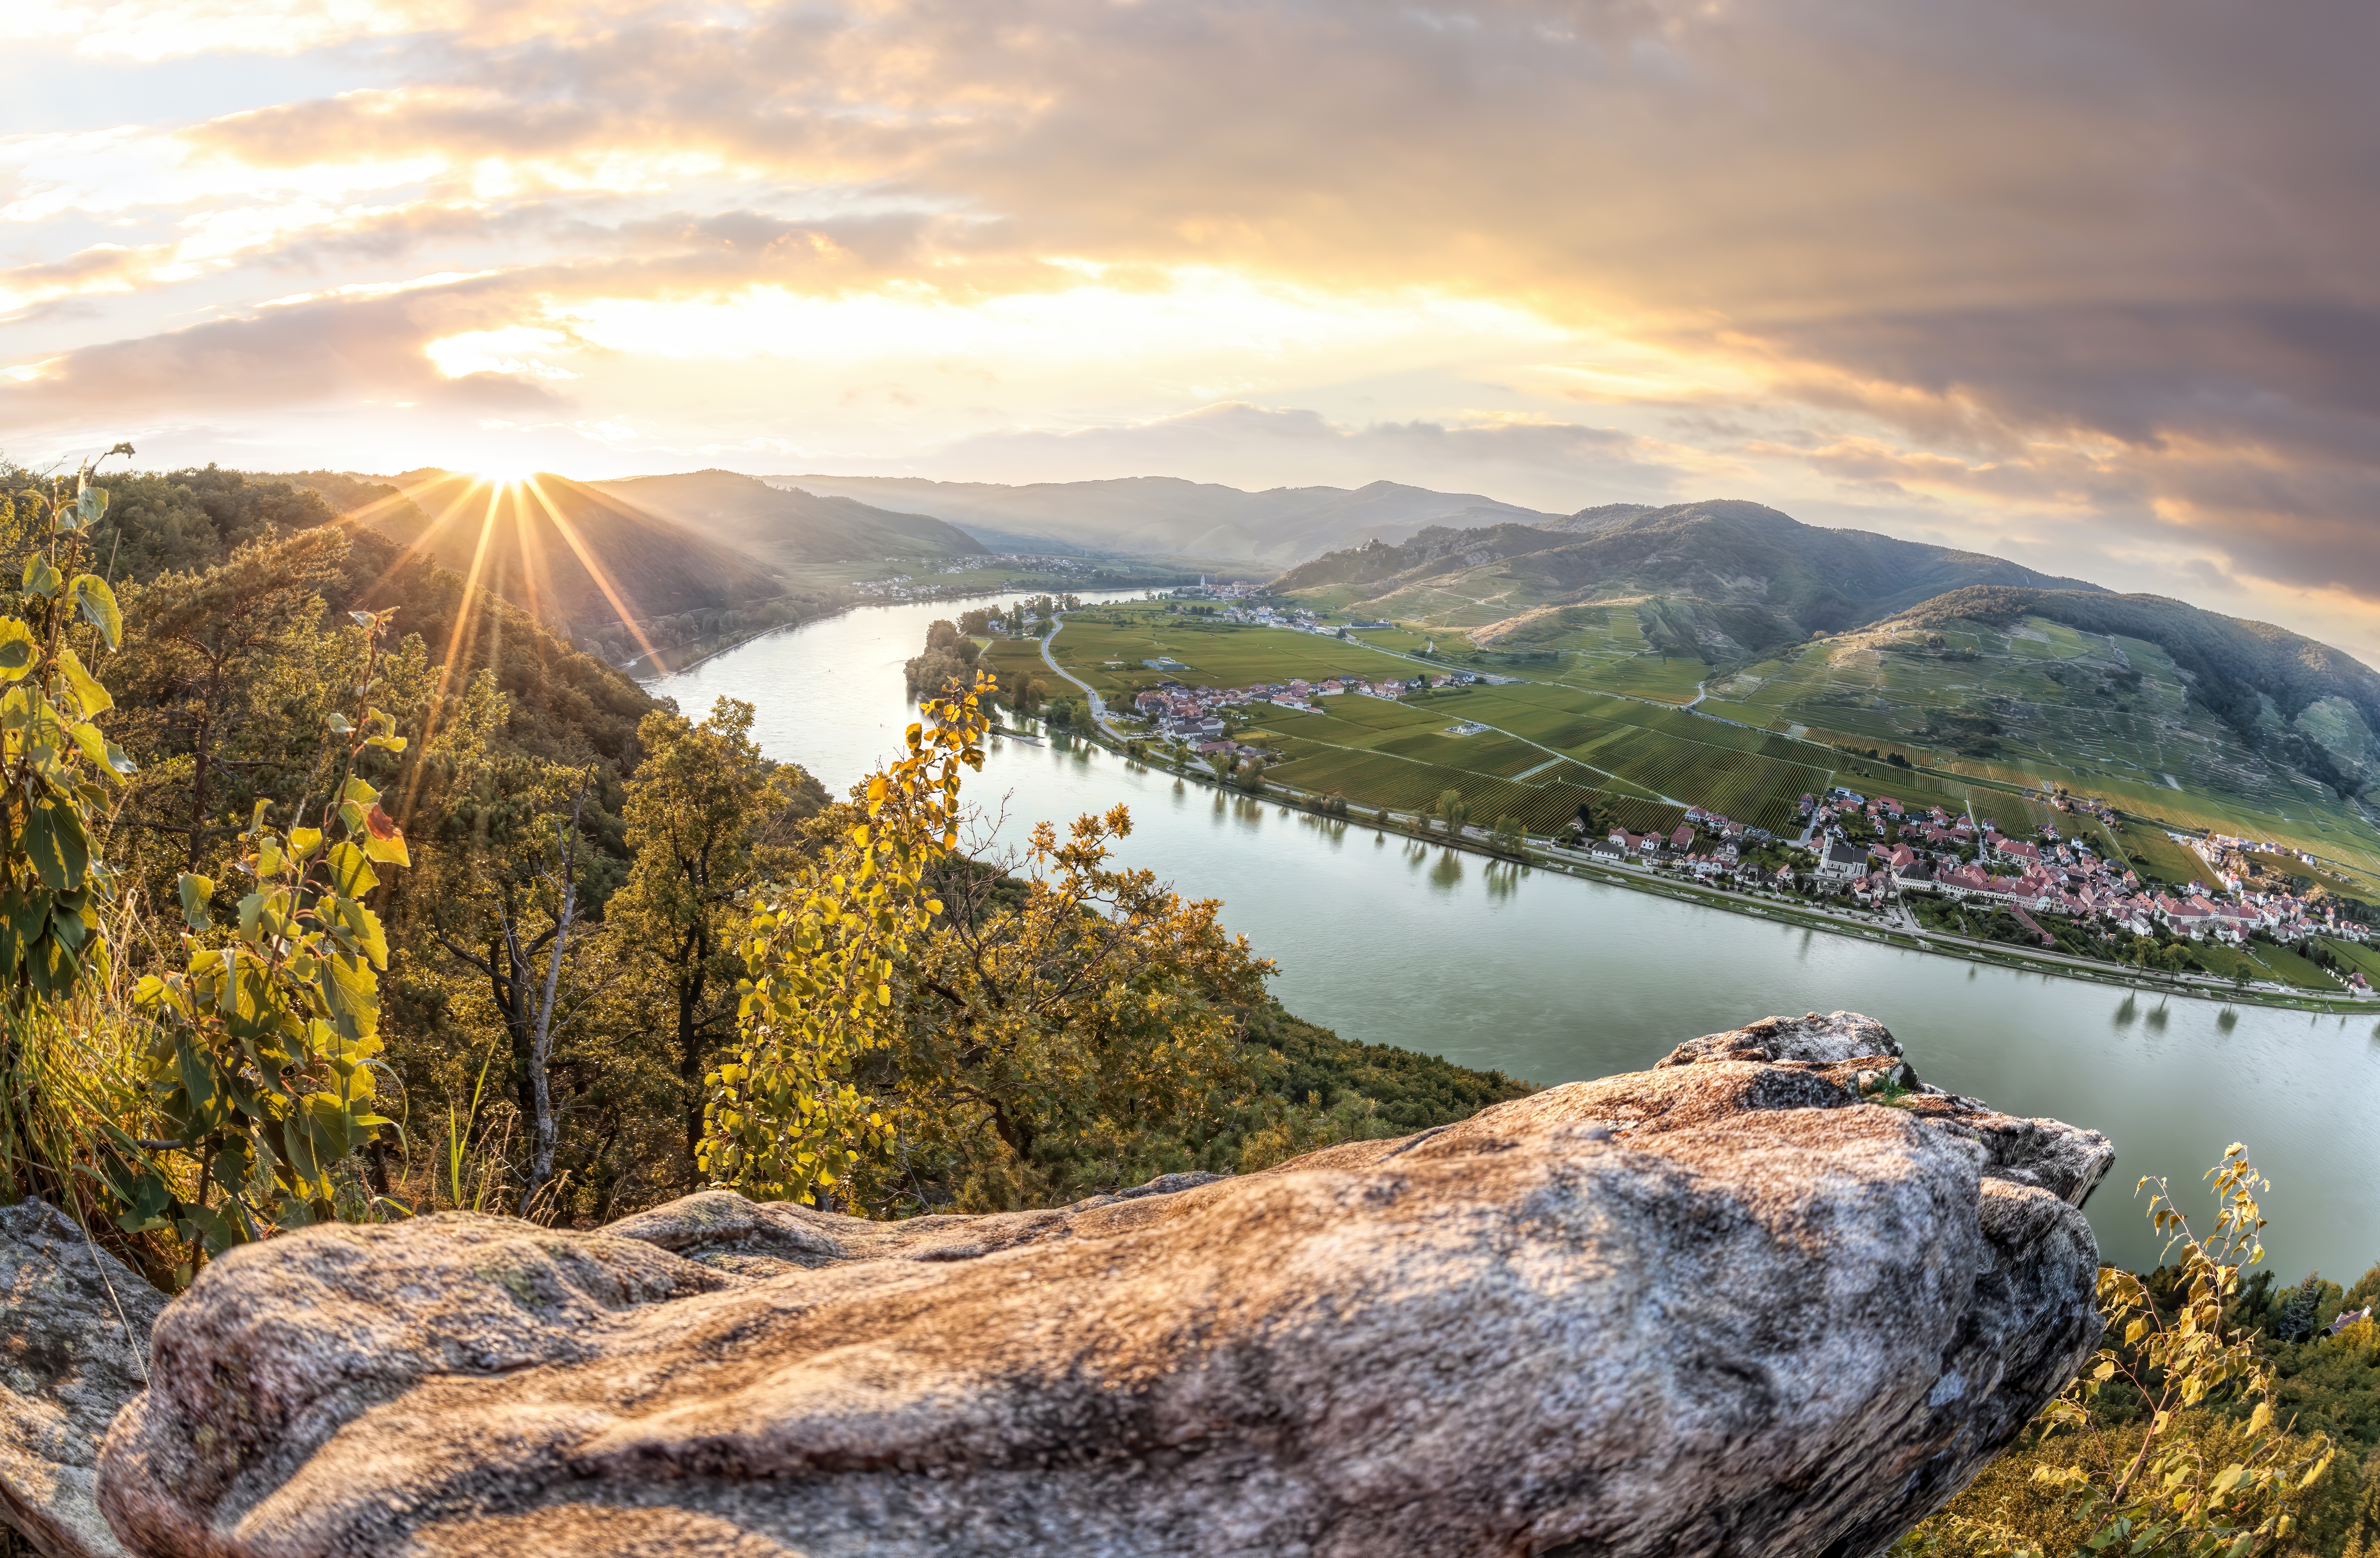 Panorama of Wachau Valley with Danube river at colorful sunset against Duernstein village in Lower Austria.